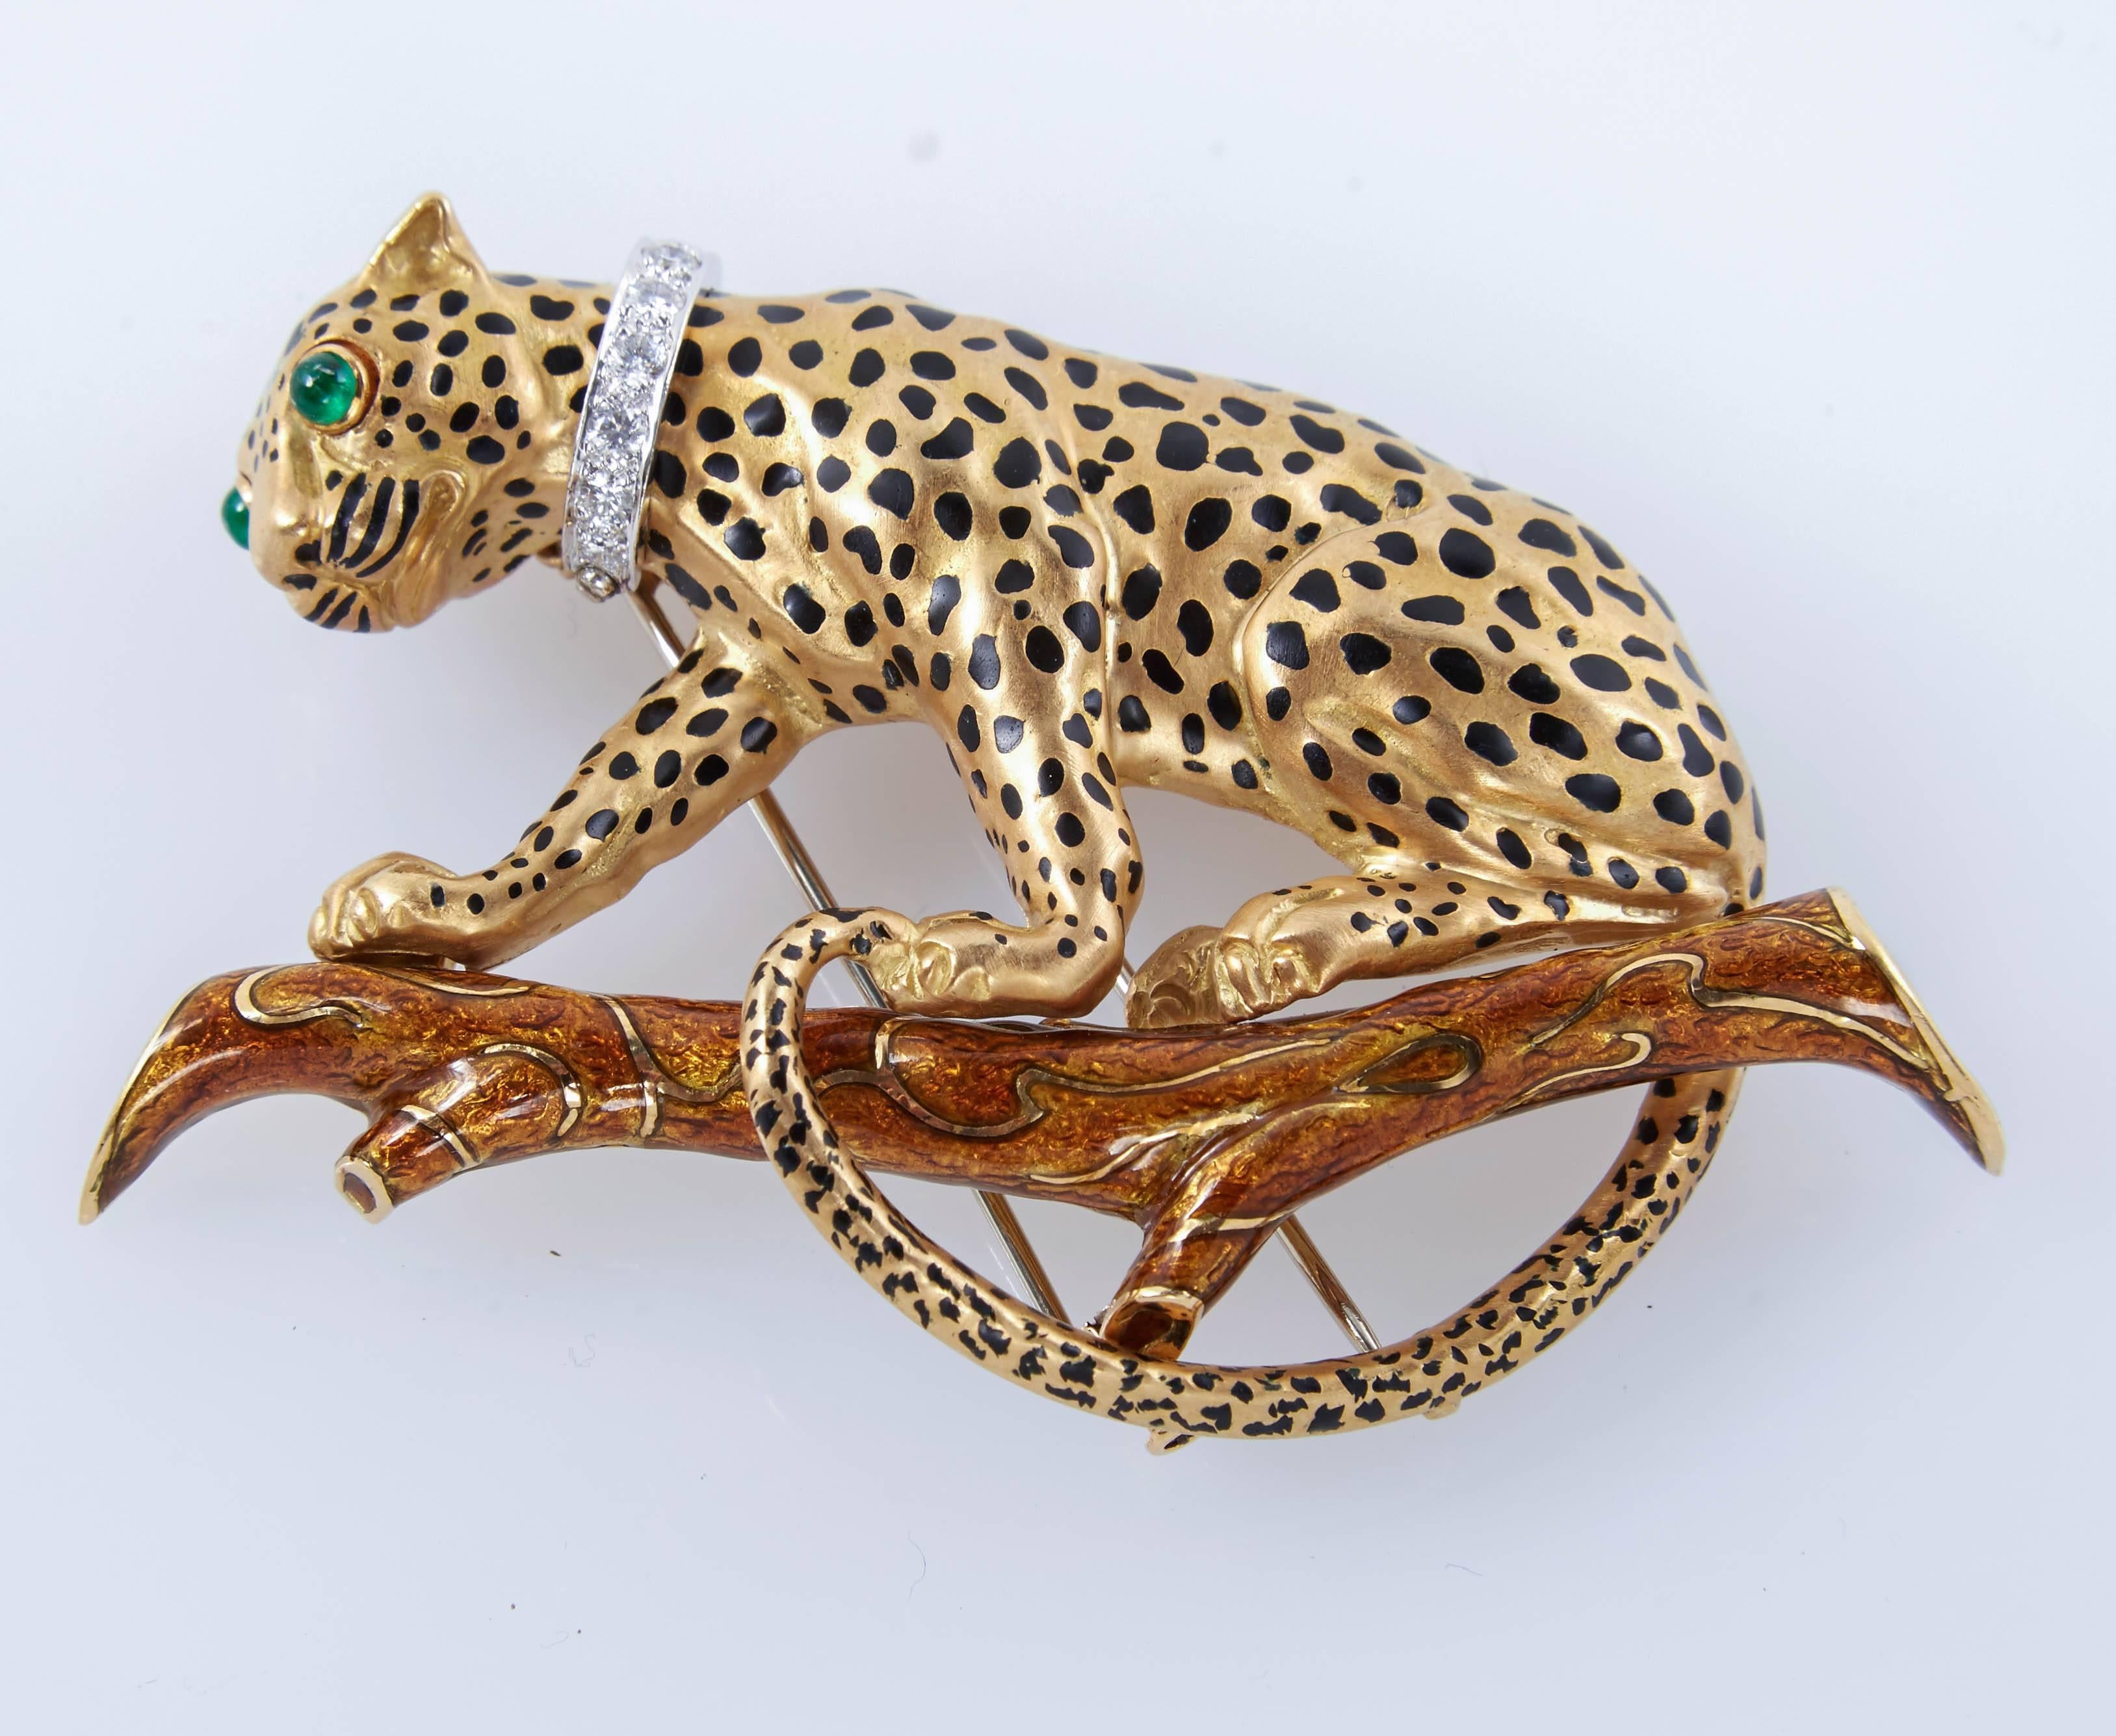 This beautiful leopard brooch is an iconic example of David's Webb nature-inspired designs. Brooch is crafted of 18k yellow gold with black enamel spots. The feline is perched atop a branch of brown enamel. Two cabochon emeralds form its eyes, while